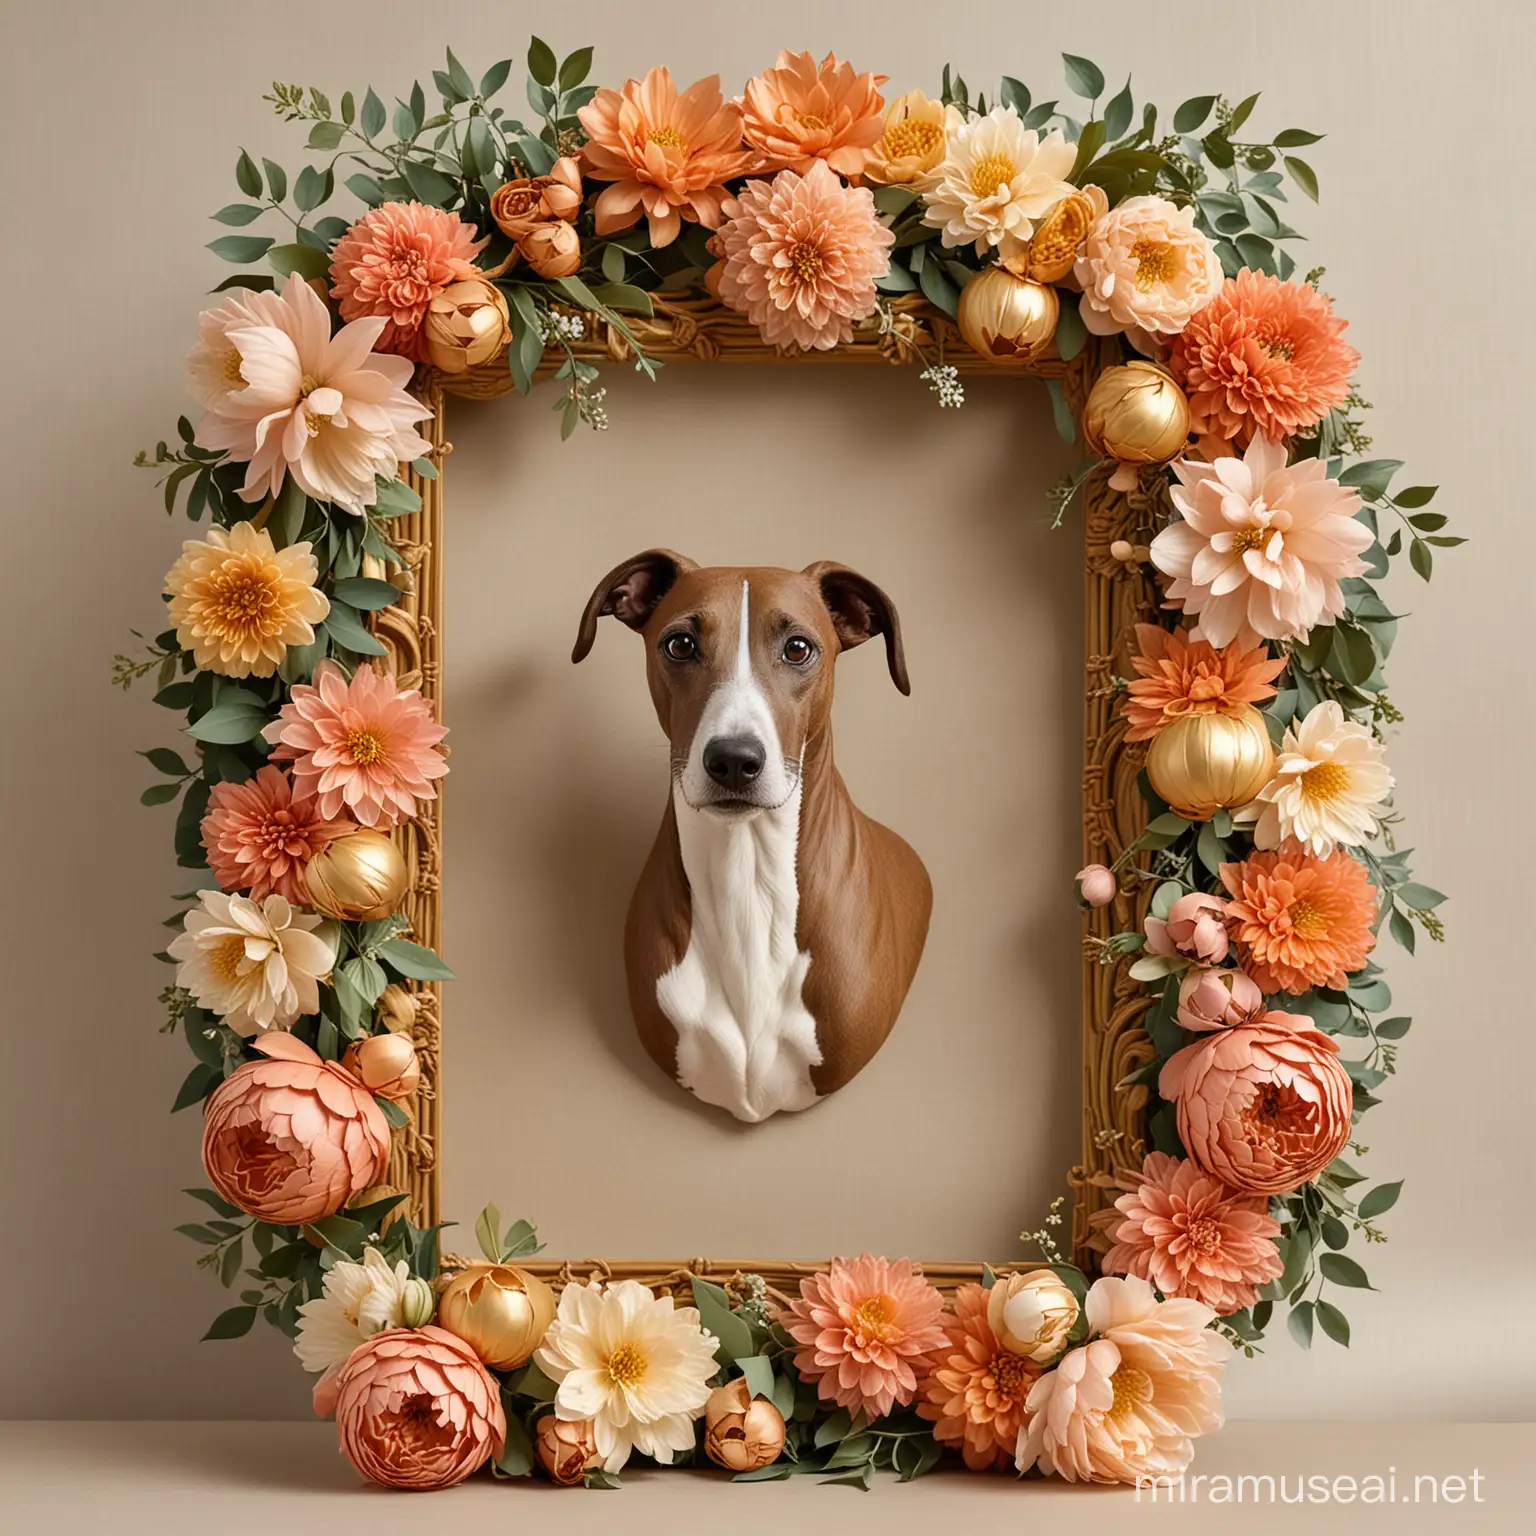 An oval gold picture frame with carved in flowers, draped in garlands of eucalyptus leaves and flowers, hellebore flowers, peony flowers and dahlia flowers. A bust of a brindle colored greyhound surrounded by chinese paper lanterns is inside the frame. Add chinese paper lantern garland hanging from the frame.